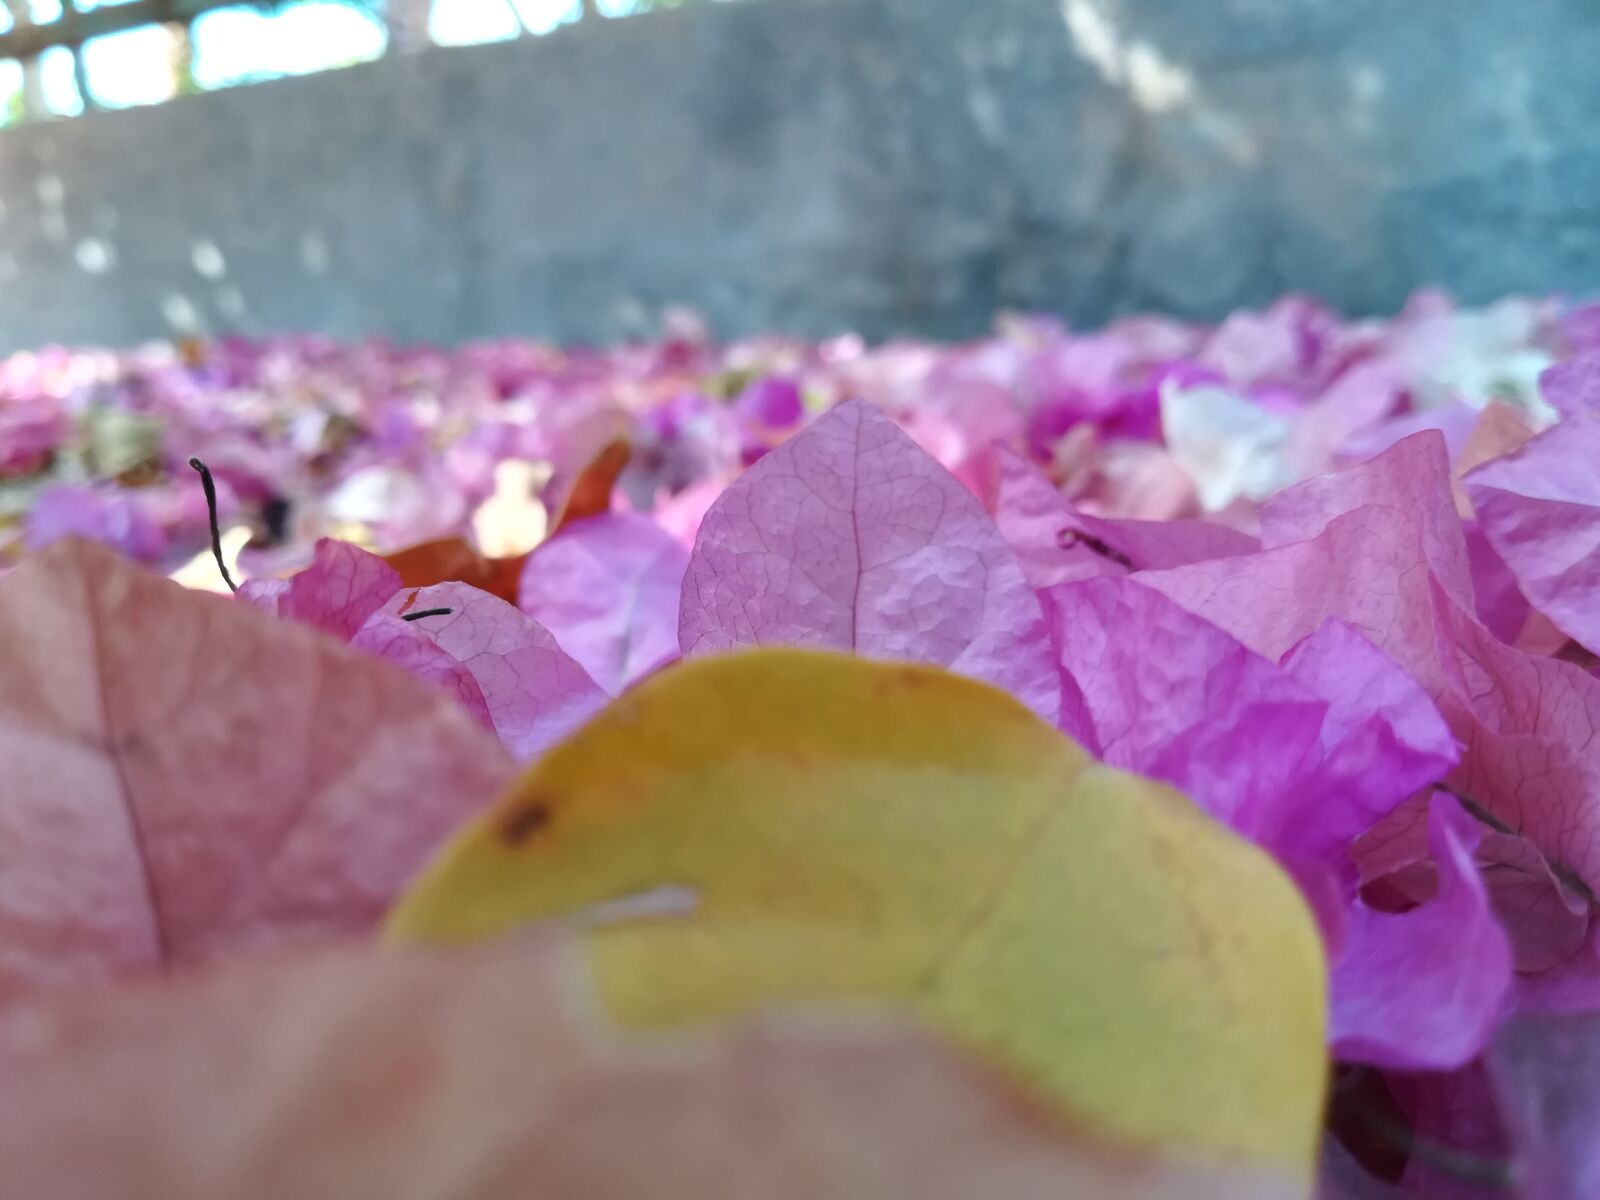 HUAWEI P8 lite 2017 sample photo. Flowers, colorful, morning photography